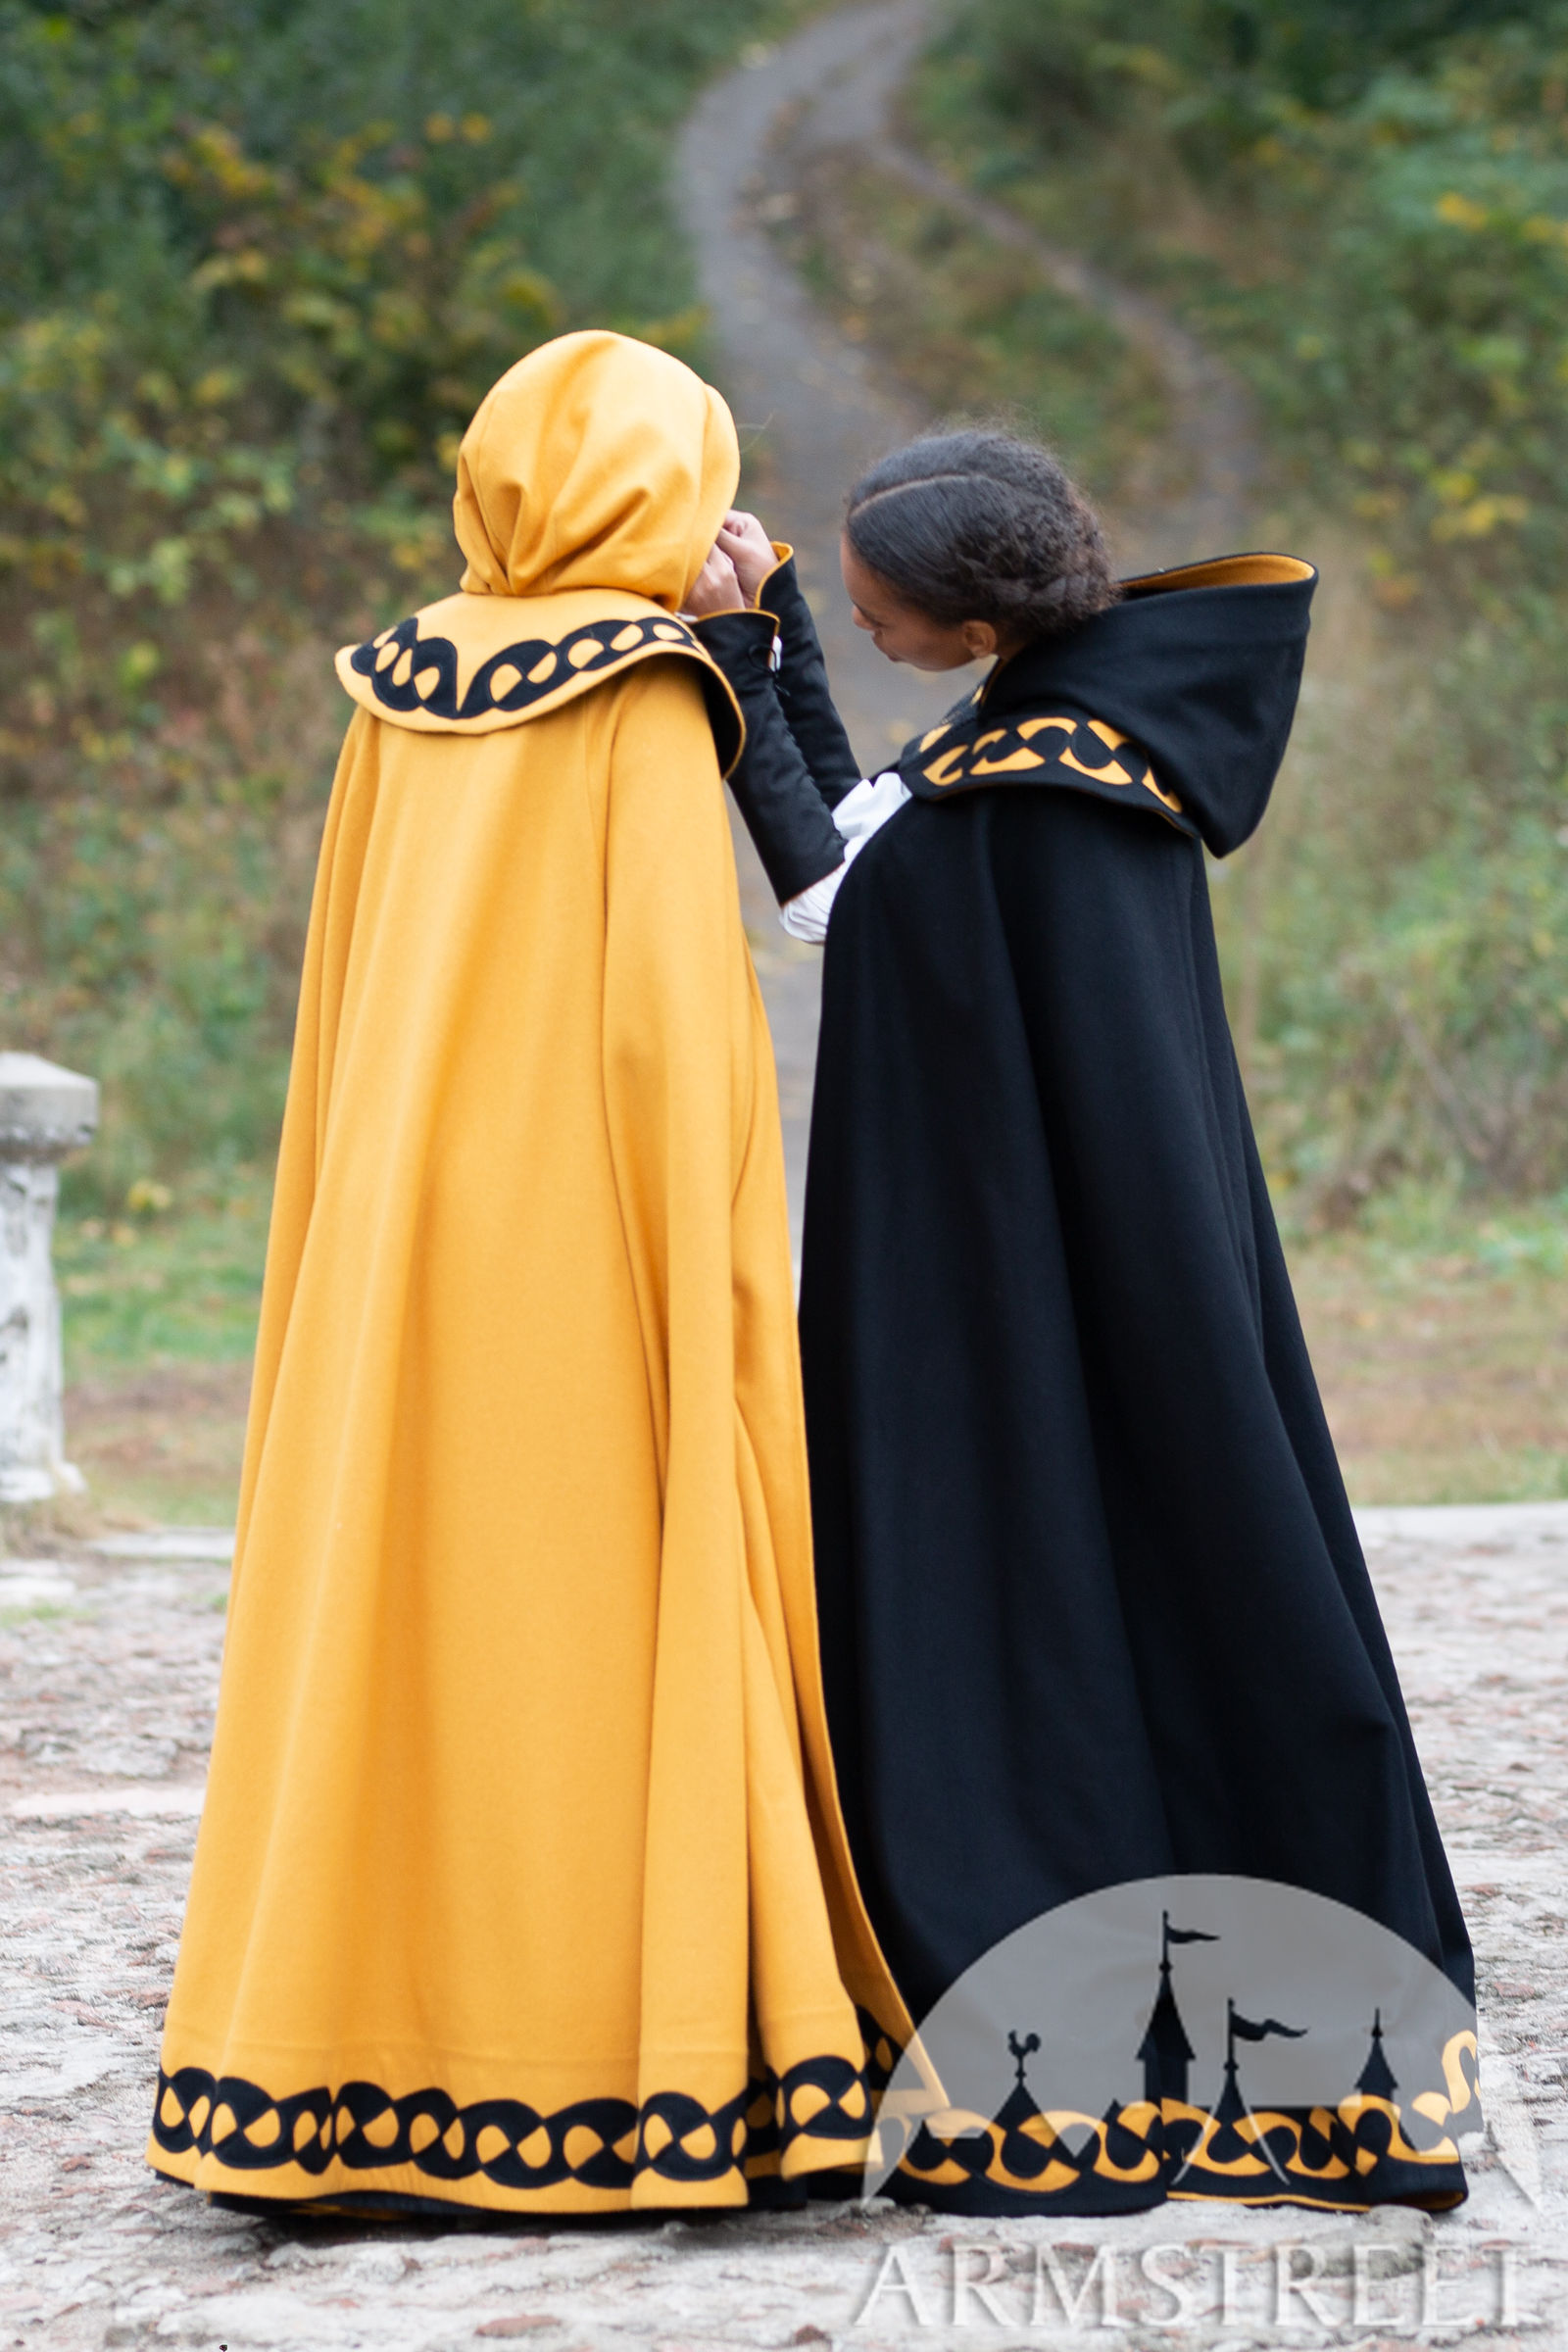 Full-round Woolen Medieval Hooded Cloak. Available in: black wool